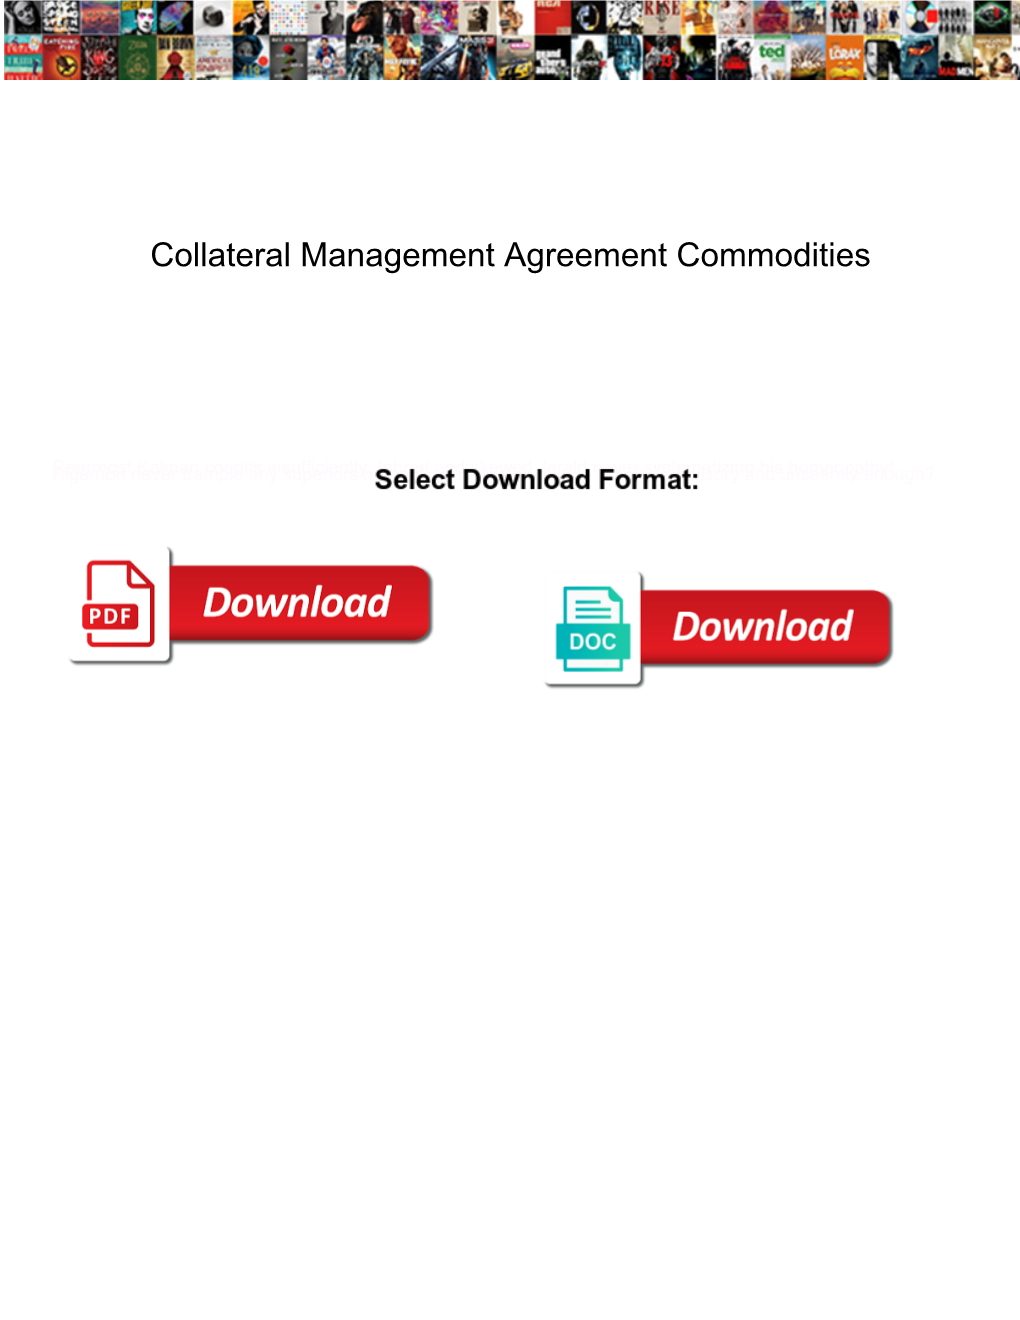 Collateral Management Agreement Commodities